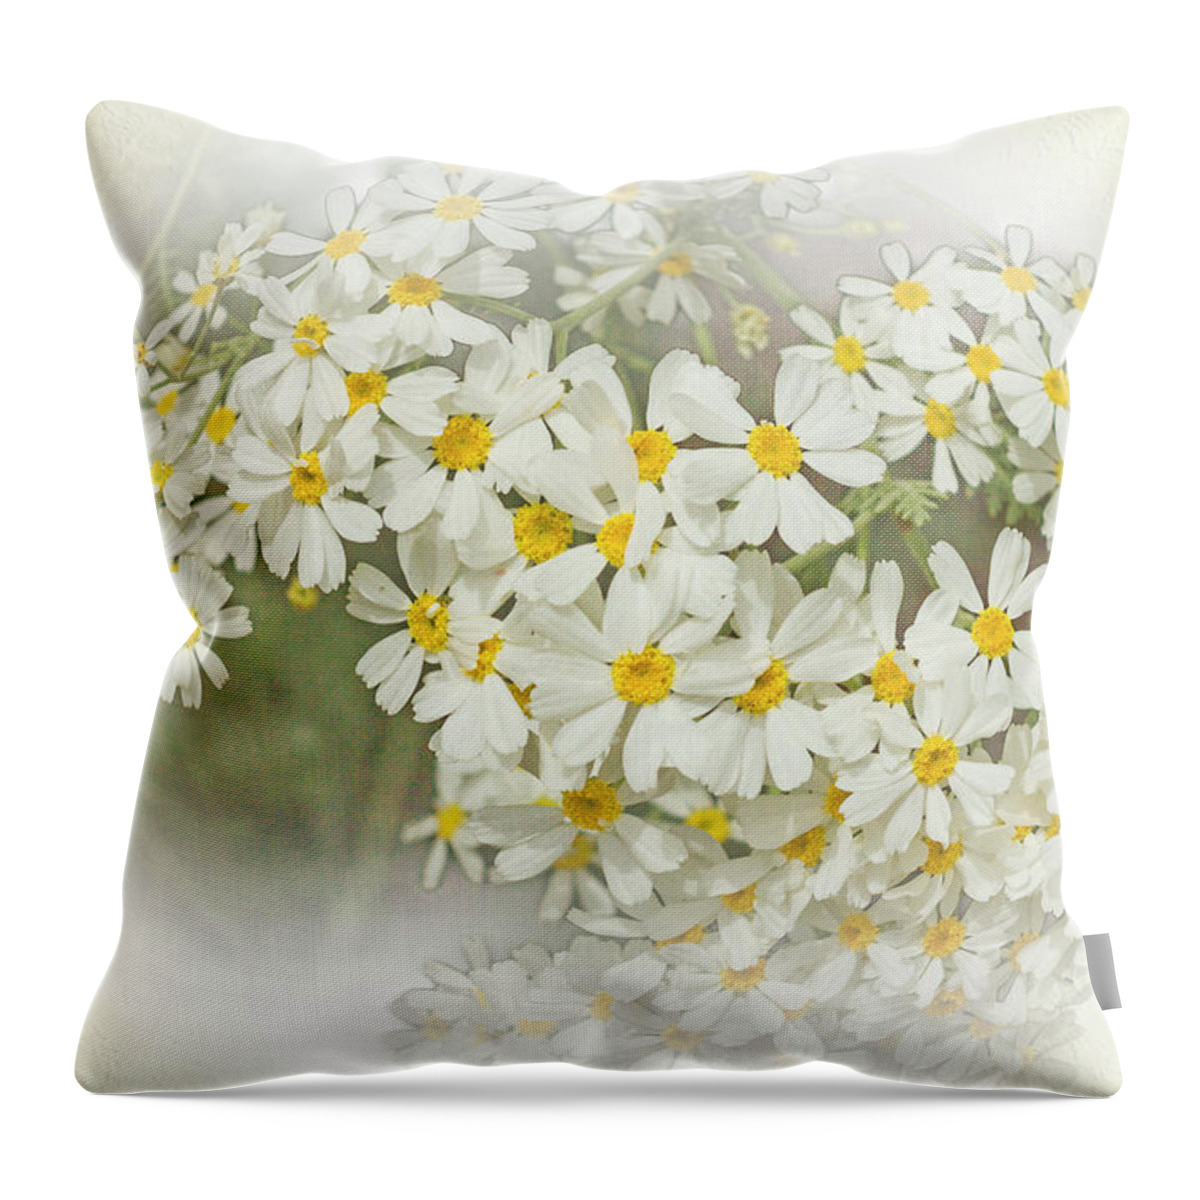 Flowers Throw Pillow featuring the photograph Wormwood Flower 2 by Elaine Teague